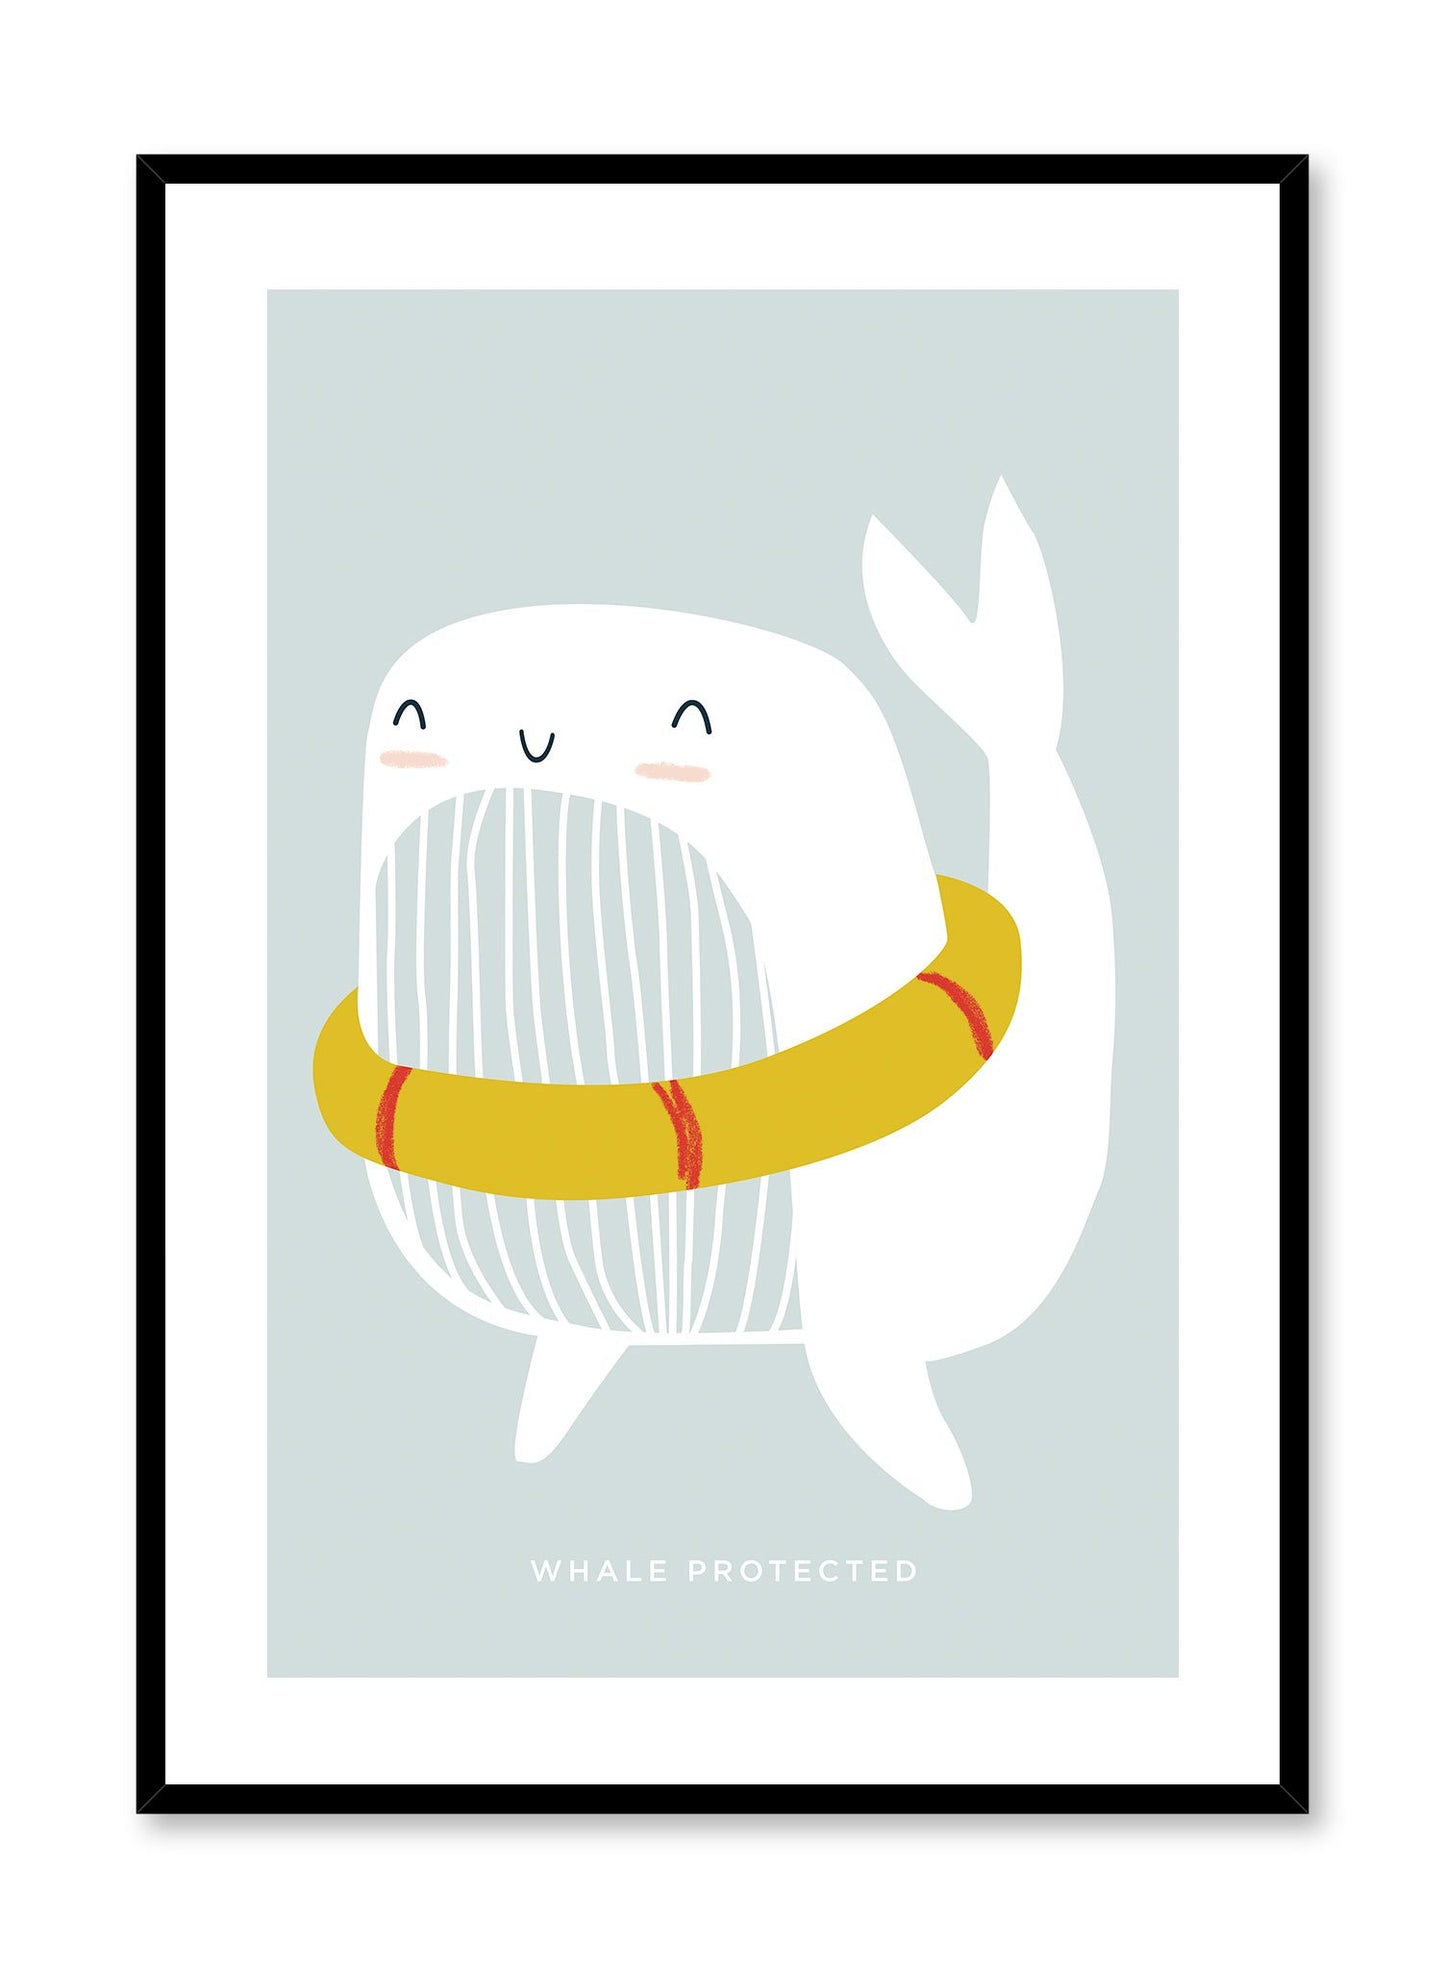 Whale Floatie is a minimalist illustration of a blushing white whale with a striped belly wearing a yellow floatie with red stripes by Opposite Wall.